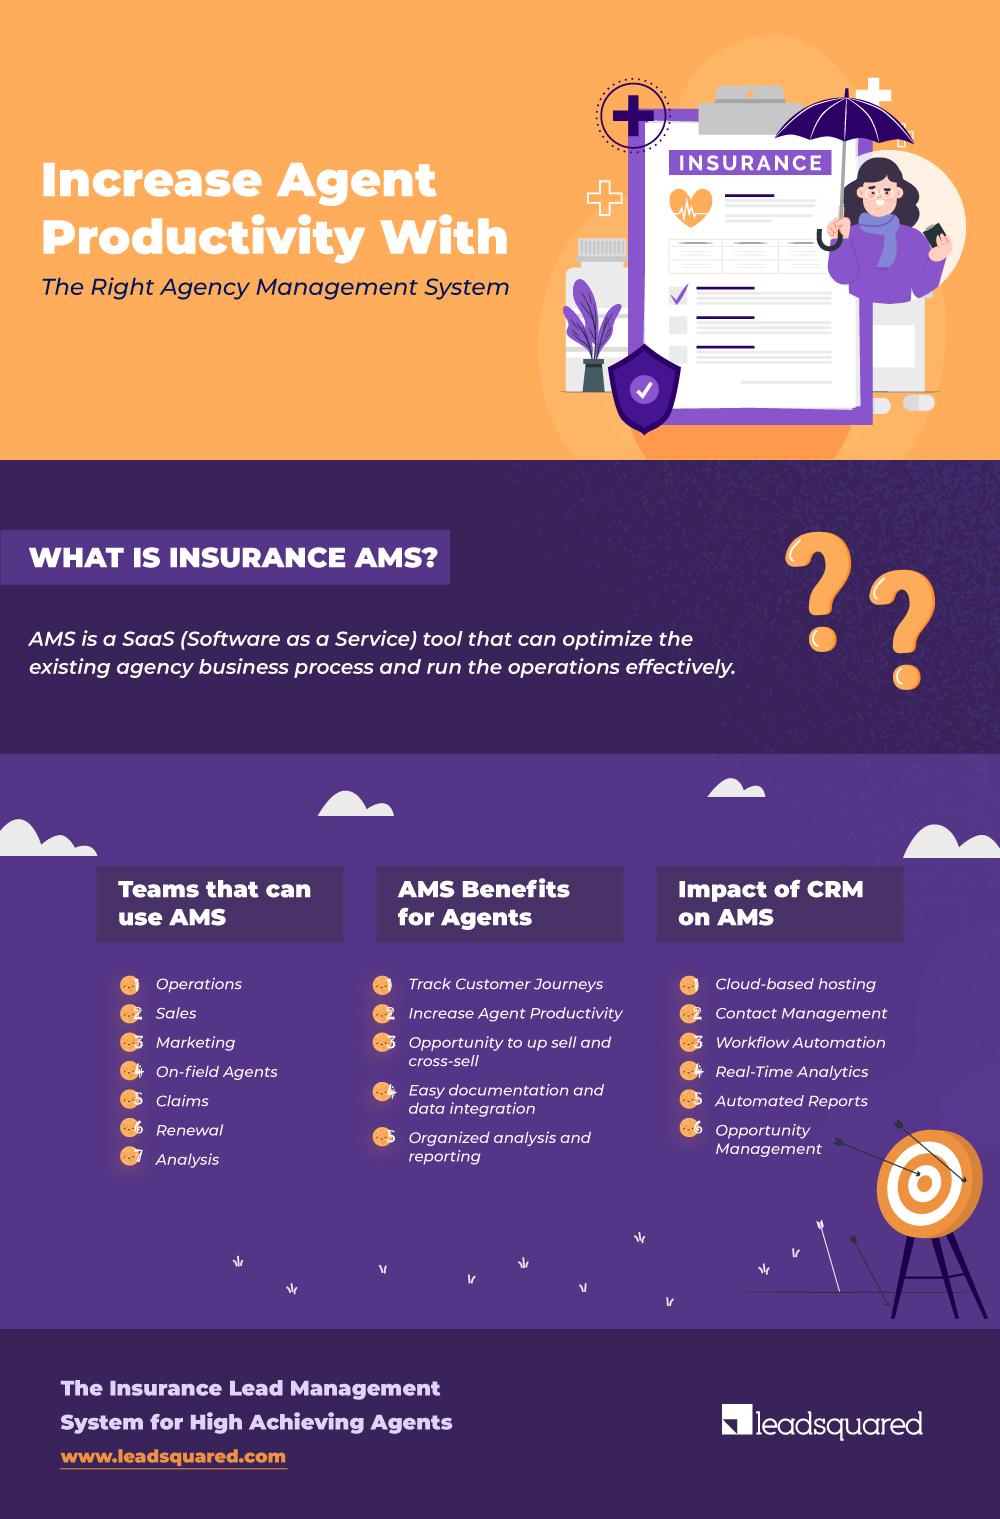 Increase Agent Productivity with the right agency management system